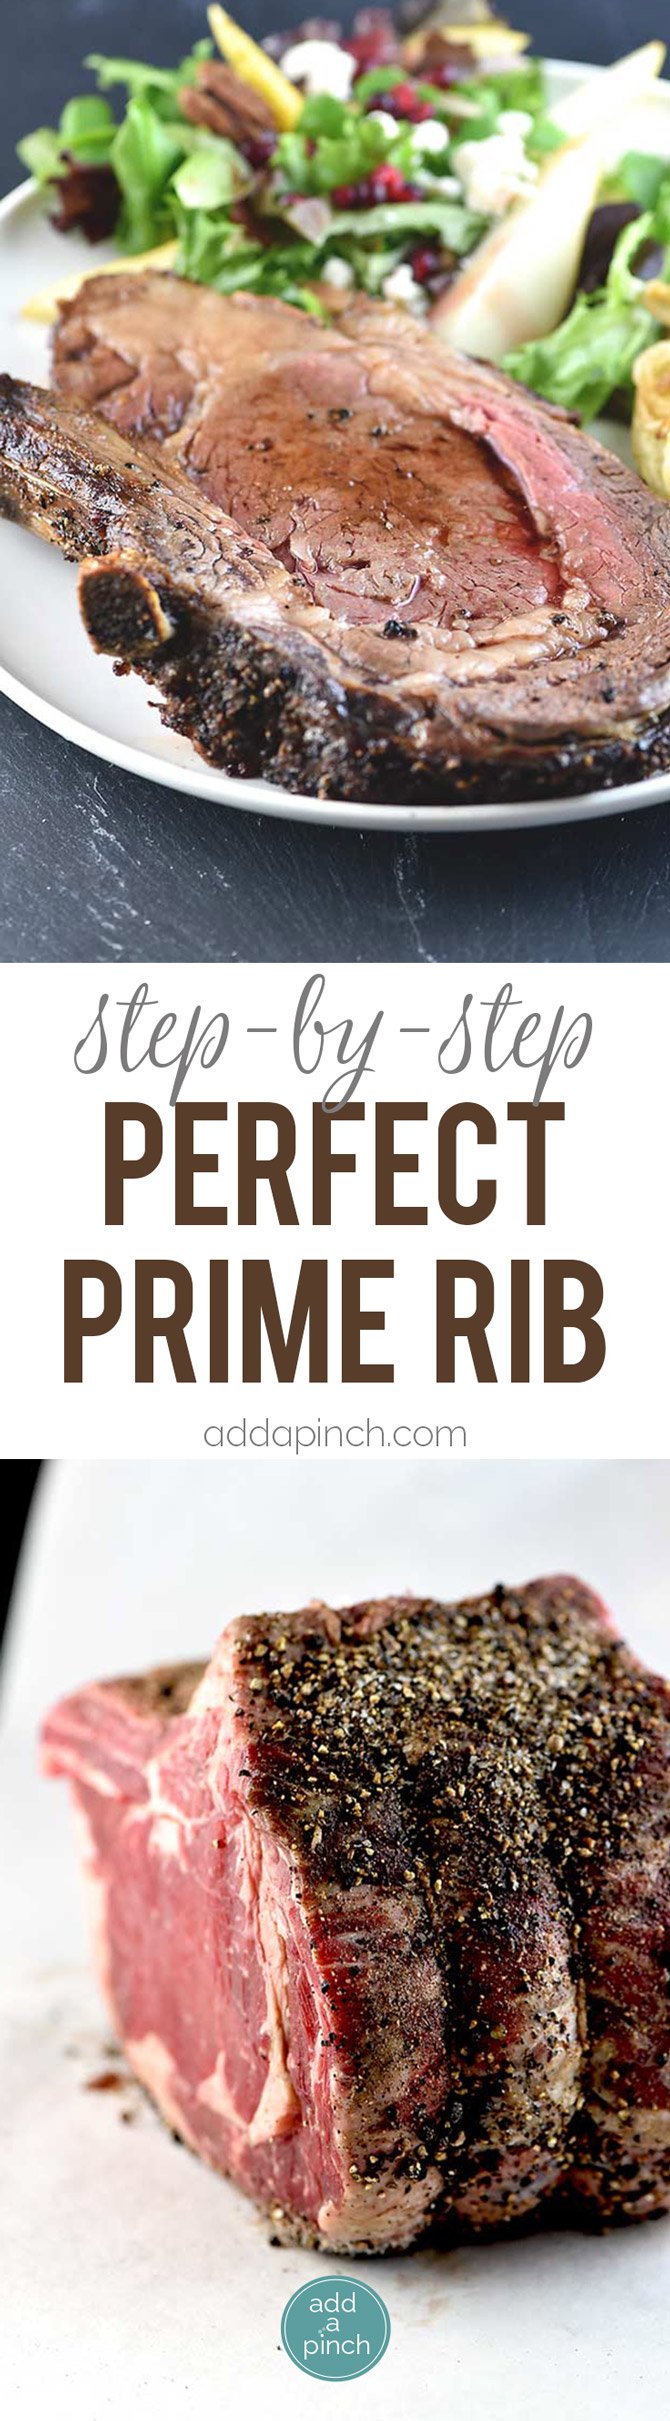 Perfect Prime Rib Recipe - This prime rib recipe results in the perfect prime rib every time. Perfect for the holidays or special occasions. With step by step tips! // addapinch.com